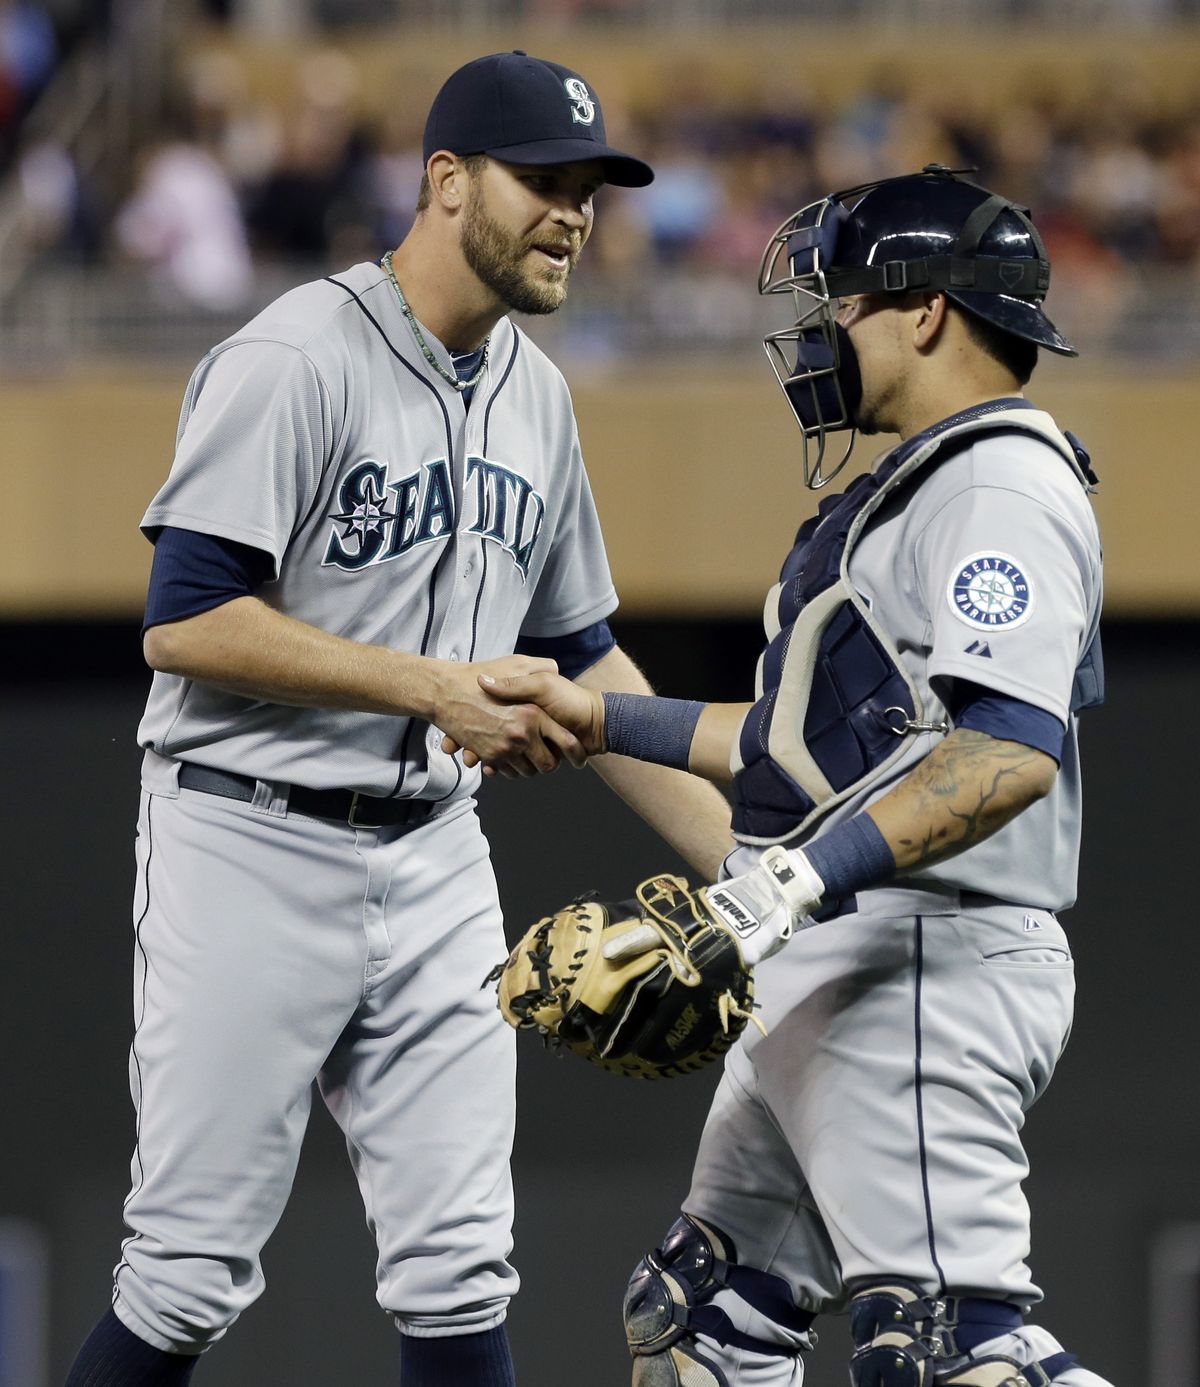 Mariners closer Tom Wilhelmsen, left, and catcher Jesus Sucre shake hands after the team’s 3-0 shutout of the Twins. (Associated Press)